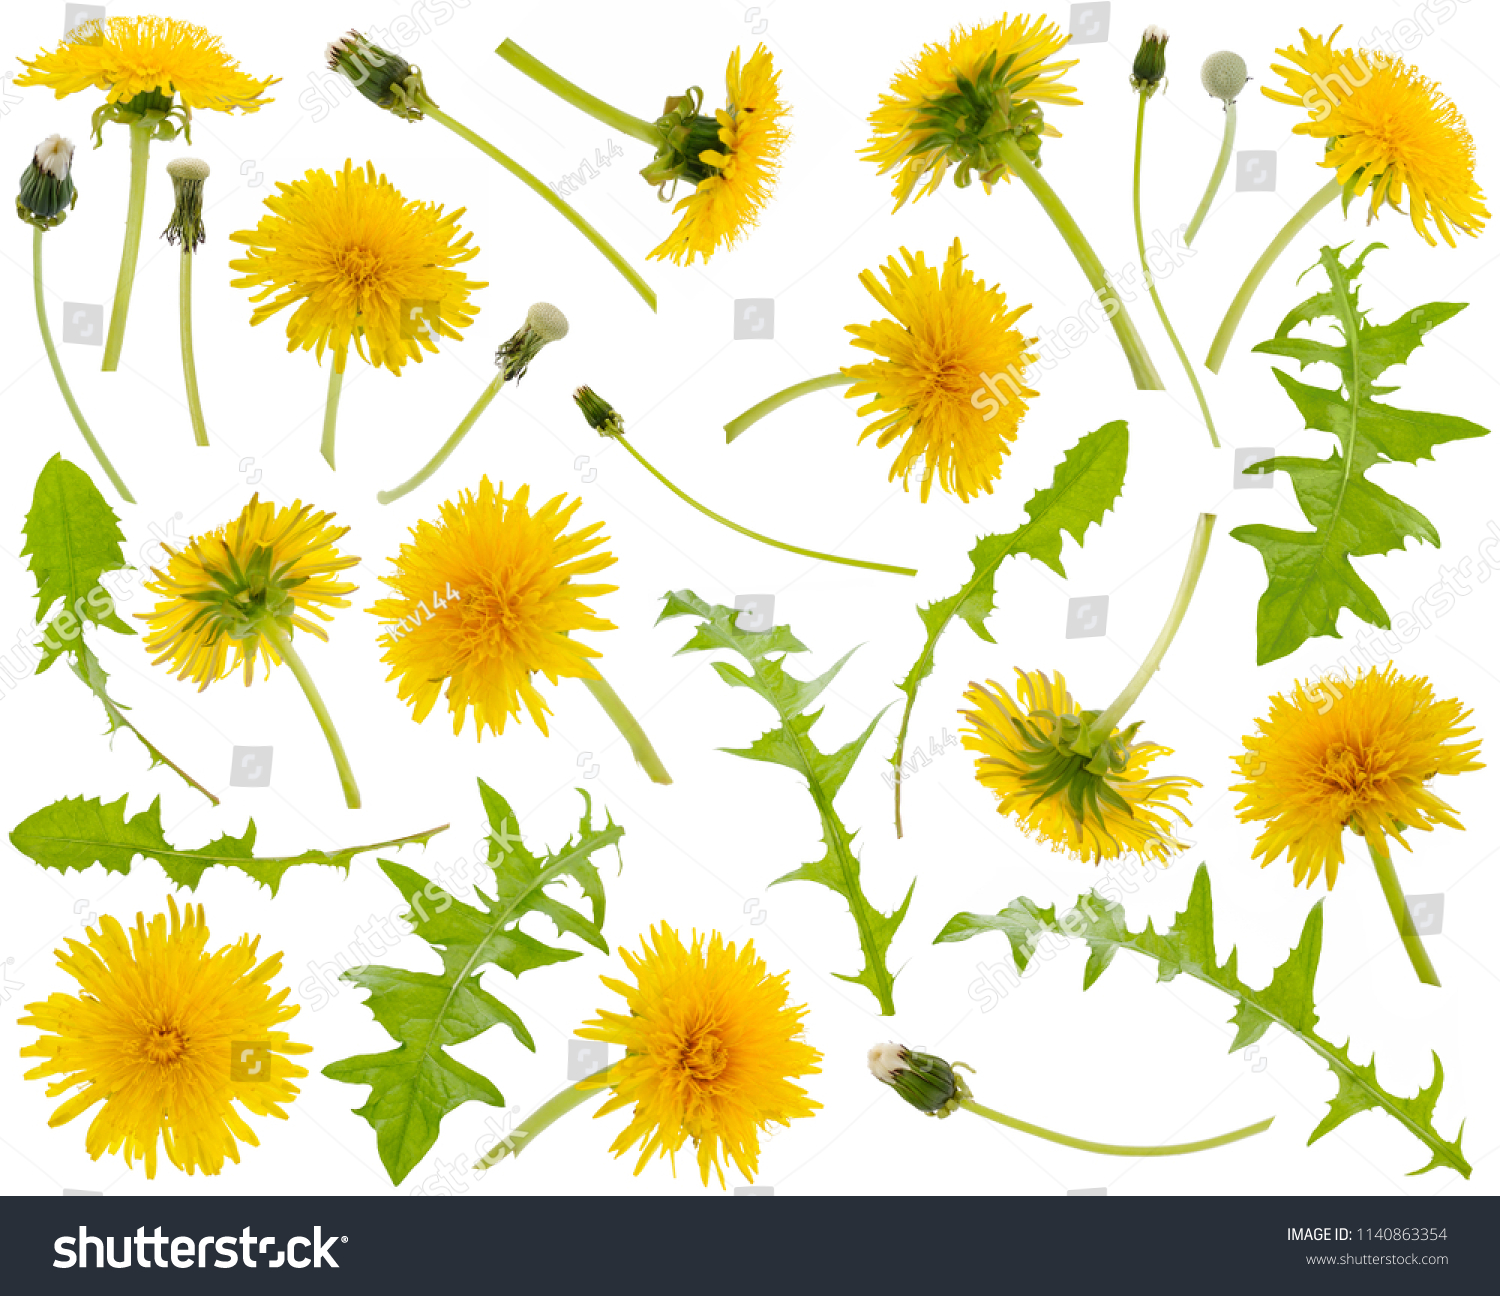 Many yellow dandelions and dandelions leaves at various angles isolated on white background #1140863354